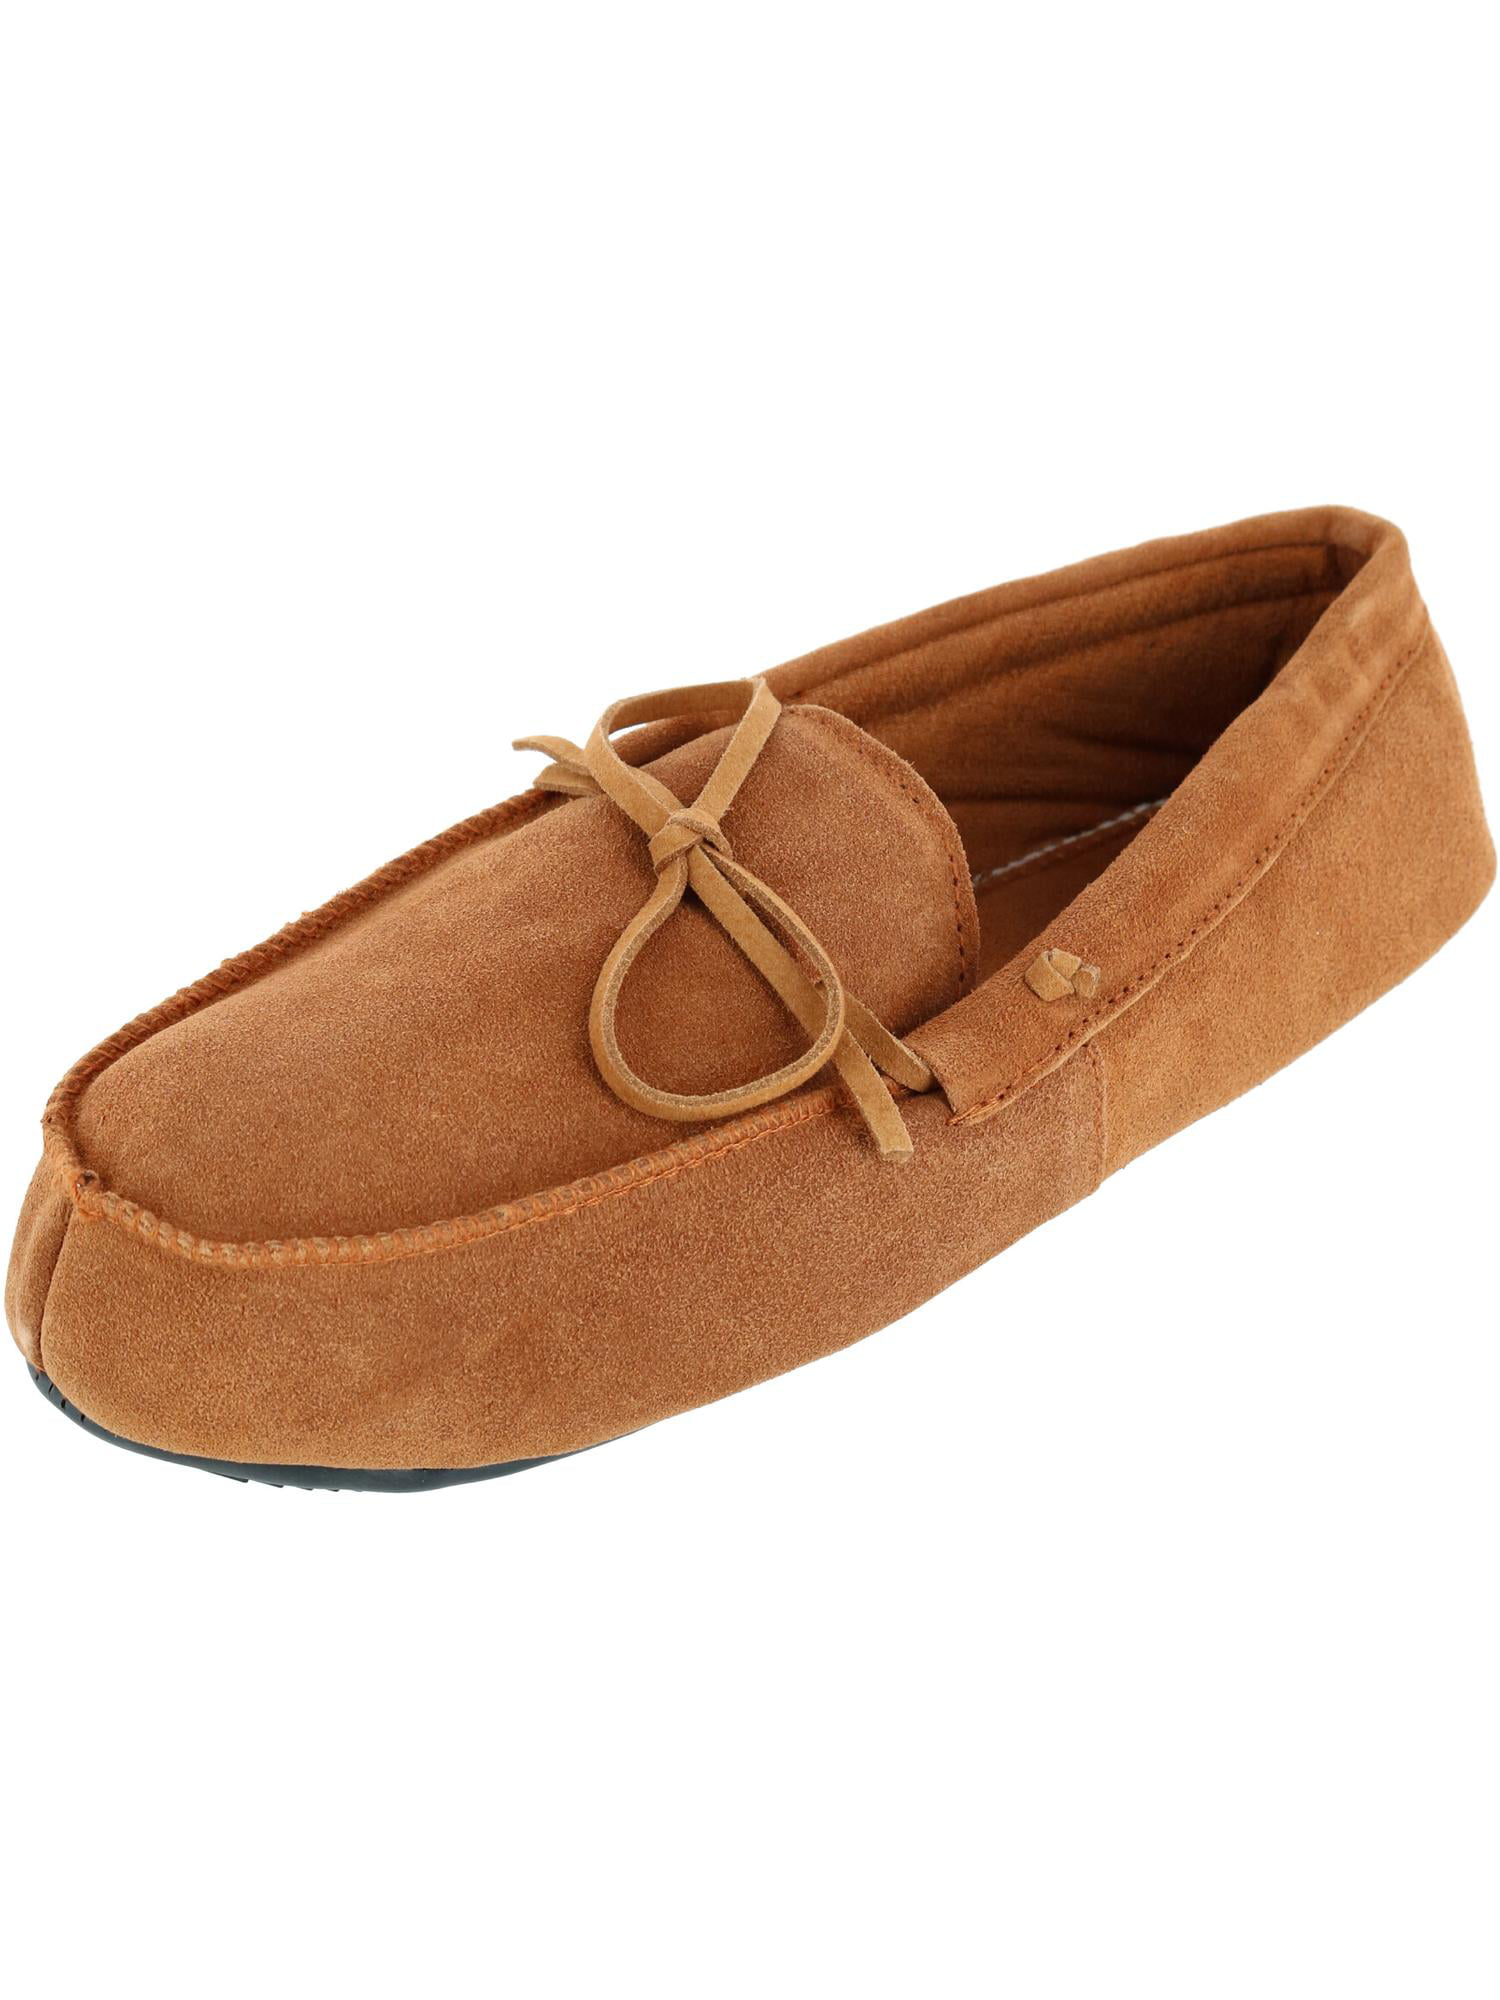 Mens Traditional Genuine Suede Leather Moccasin Slippers with Rubber Sole